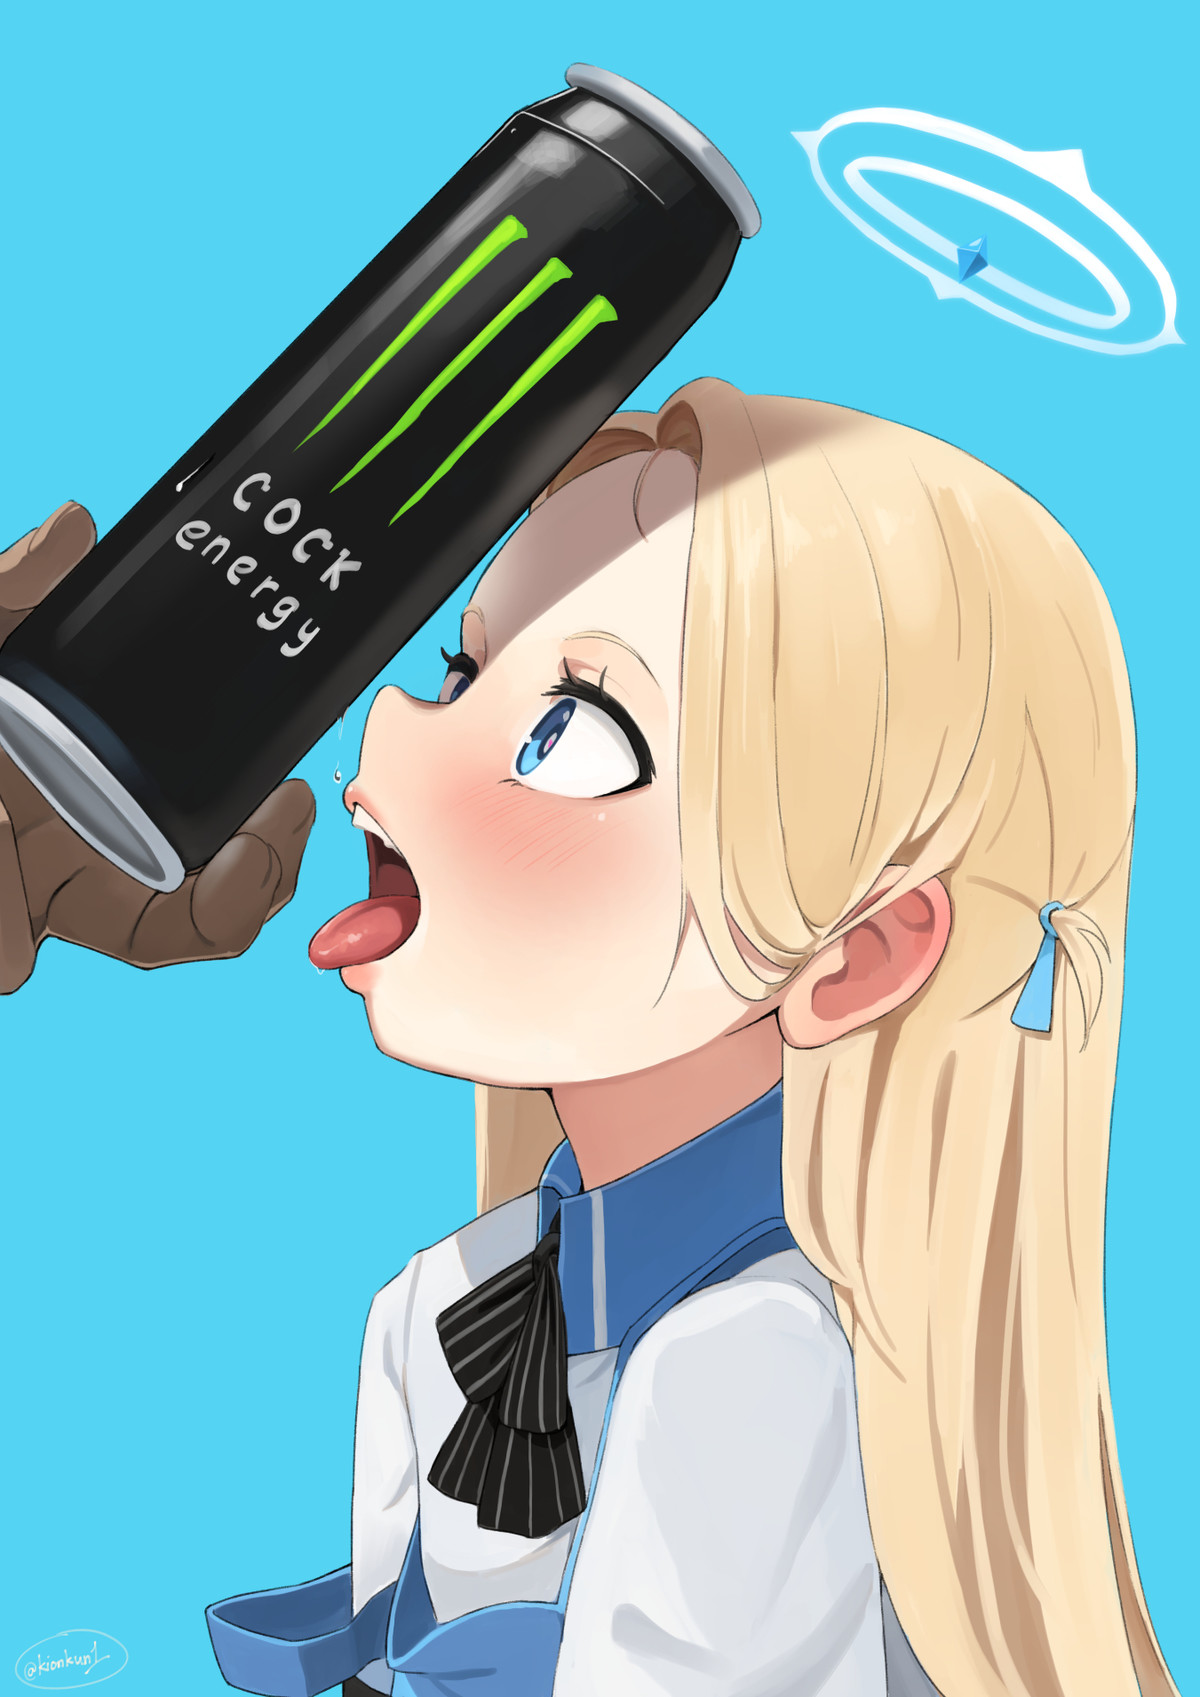 Energy drink. join list: AraSfwPosts (58 subs)Mention Clicks: 3173Msgs Sent: 893Mention History.. this character is looking a bit young for anything relating to that